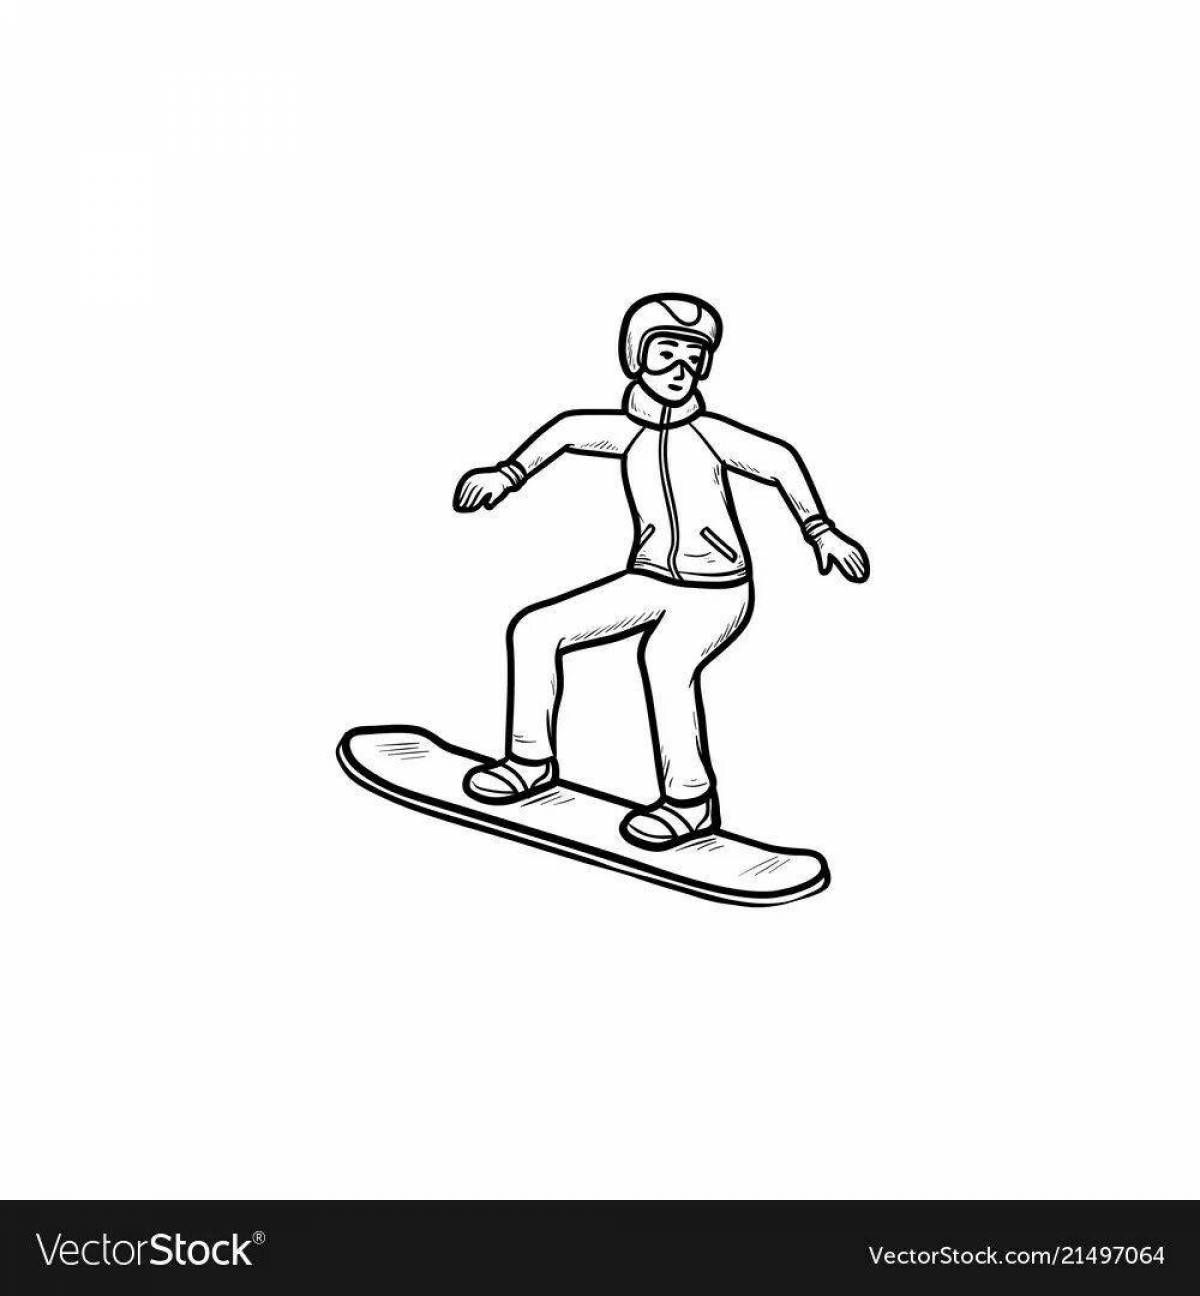 Amazing snowboard coloring page for kids